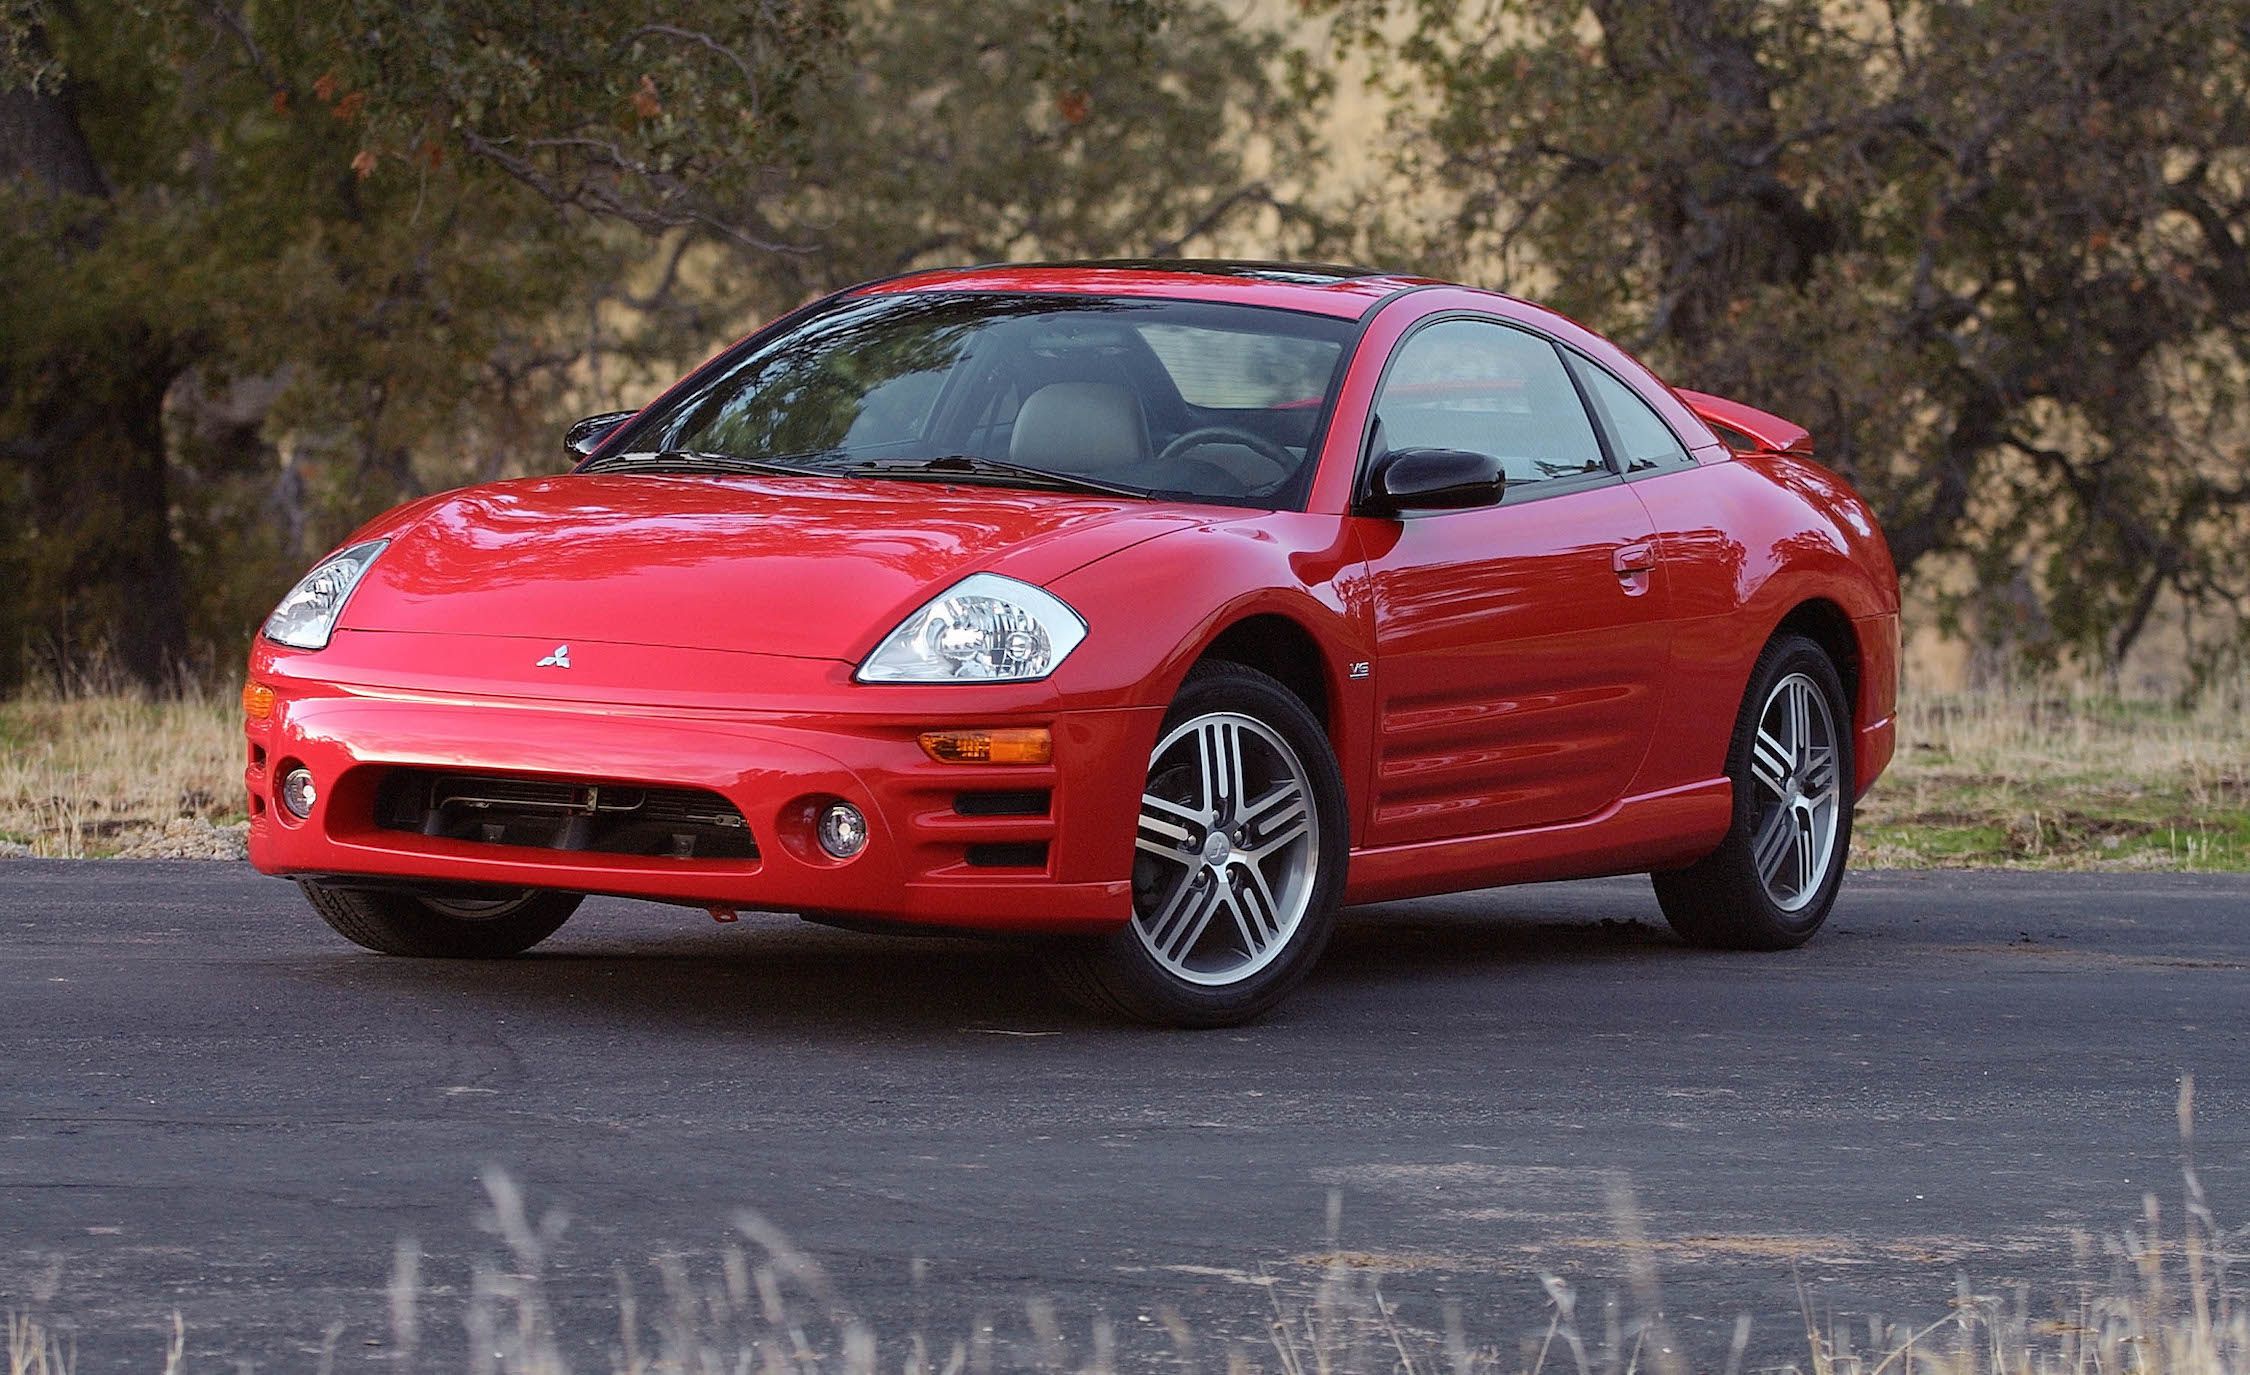 Total Eclipse of the Mitsubishi: History of the Ill-Starred Sports Coupe